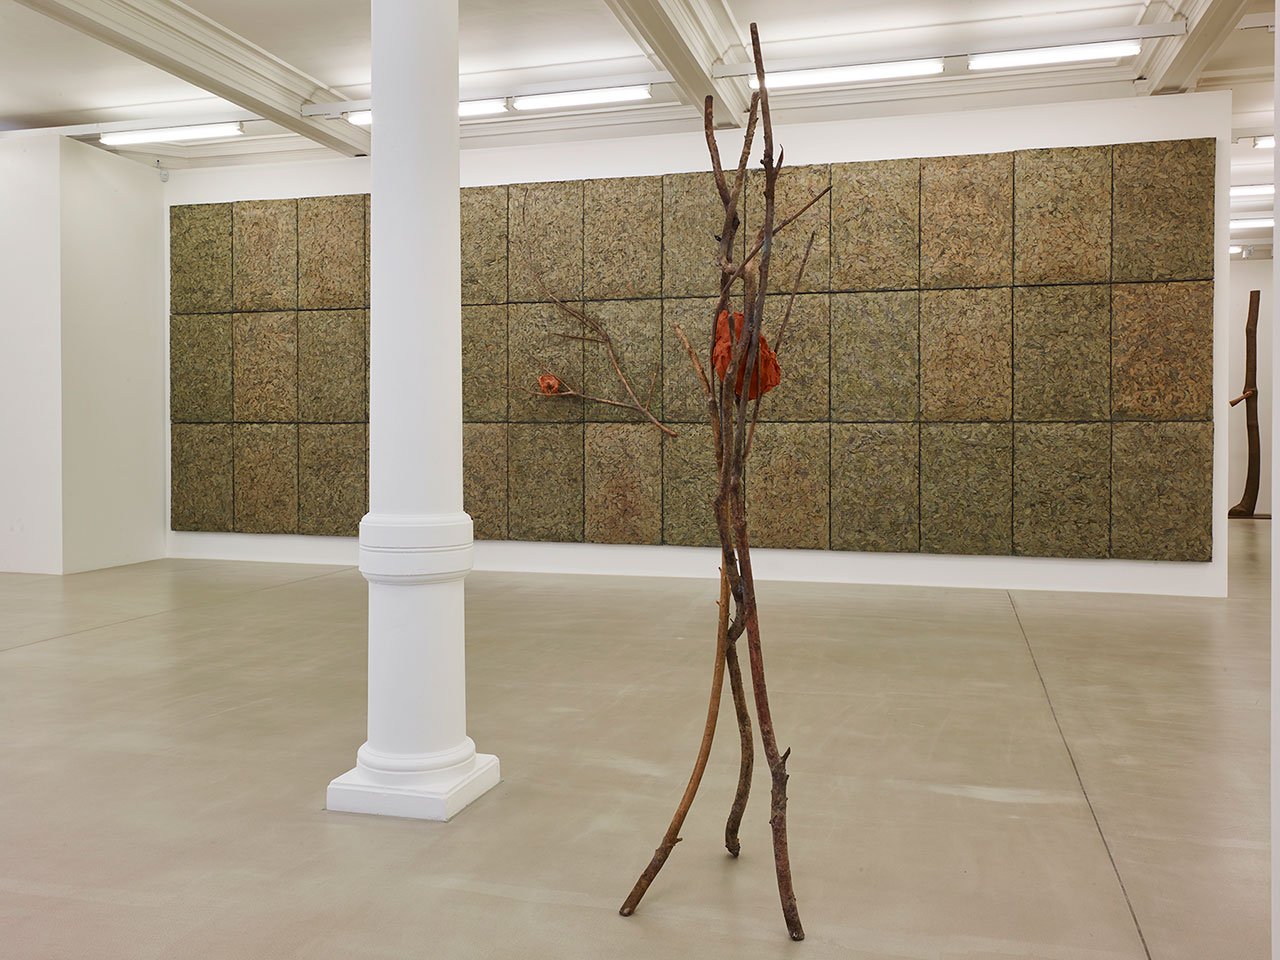 Giuseppe Penone, Fui, Saró, Non Sono (I was, I will be, I am not). Installation view from Marian Goodman Gallery London. Courtesy the artist and Marian Goodman Gallery.